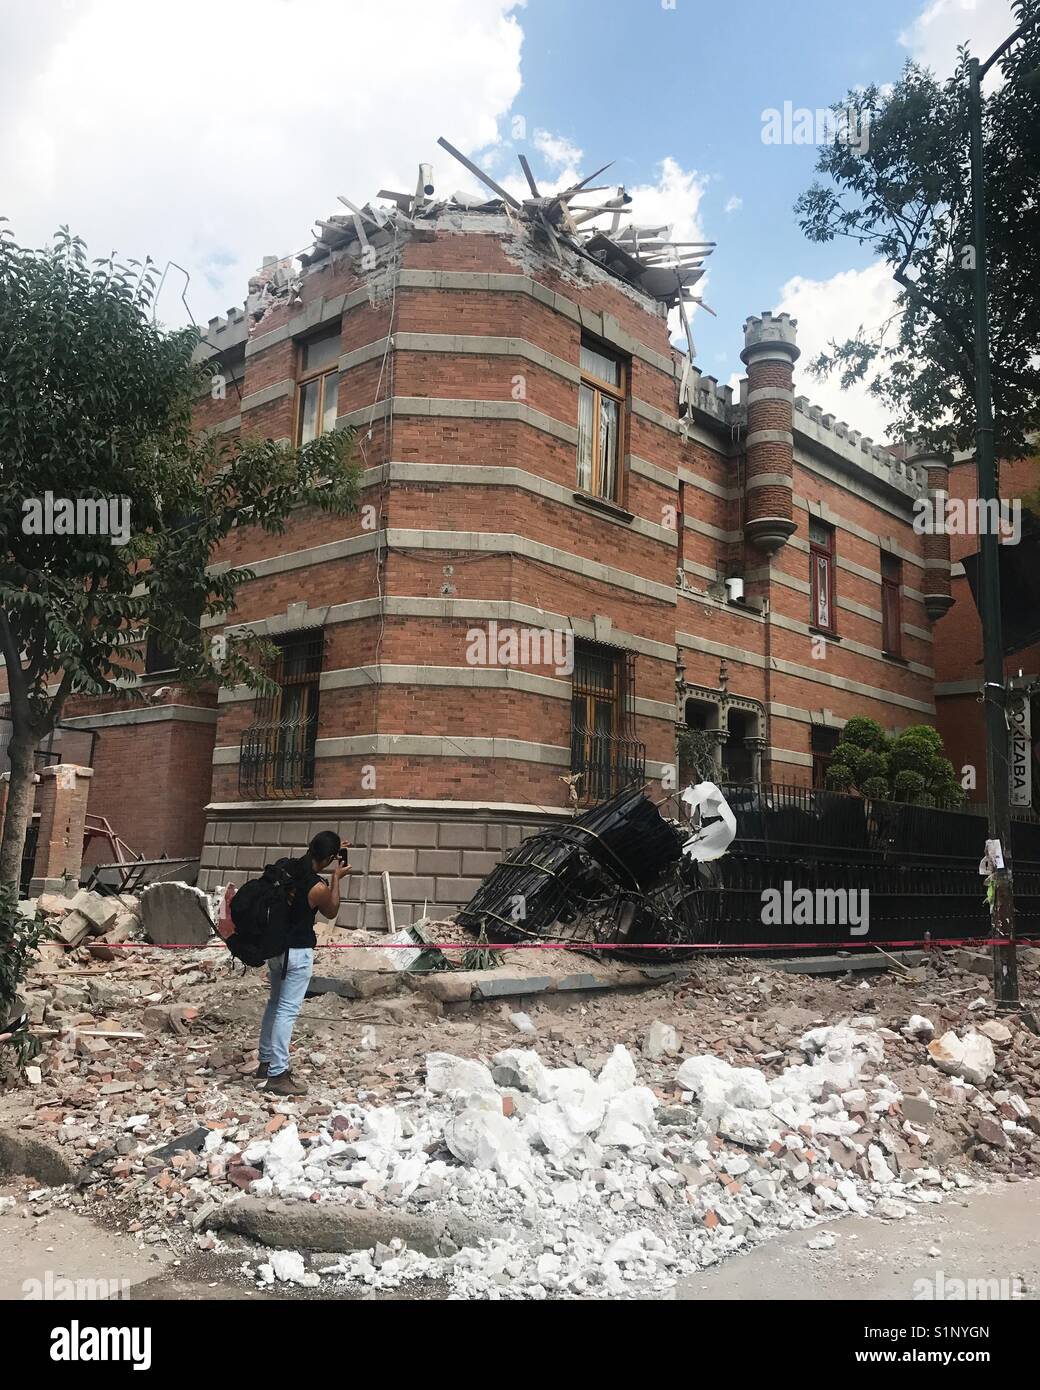 A photographer takes pictures of a damaged building after an earthquake in Colonia Roma, Mexico City, Mexico Stock Photo